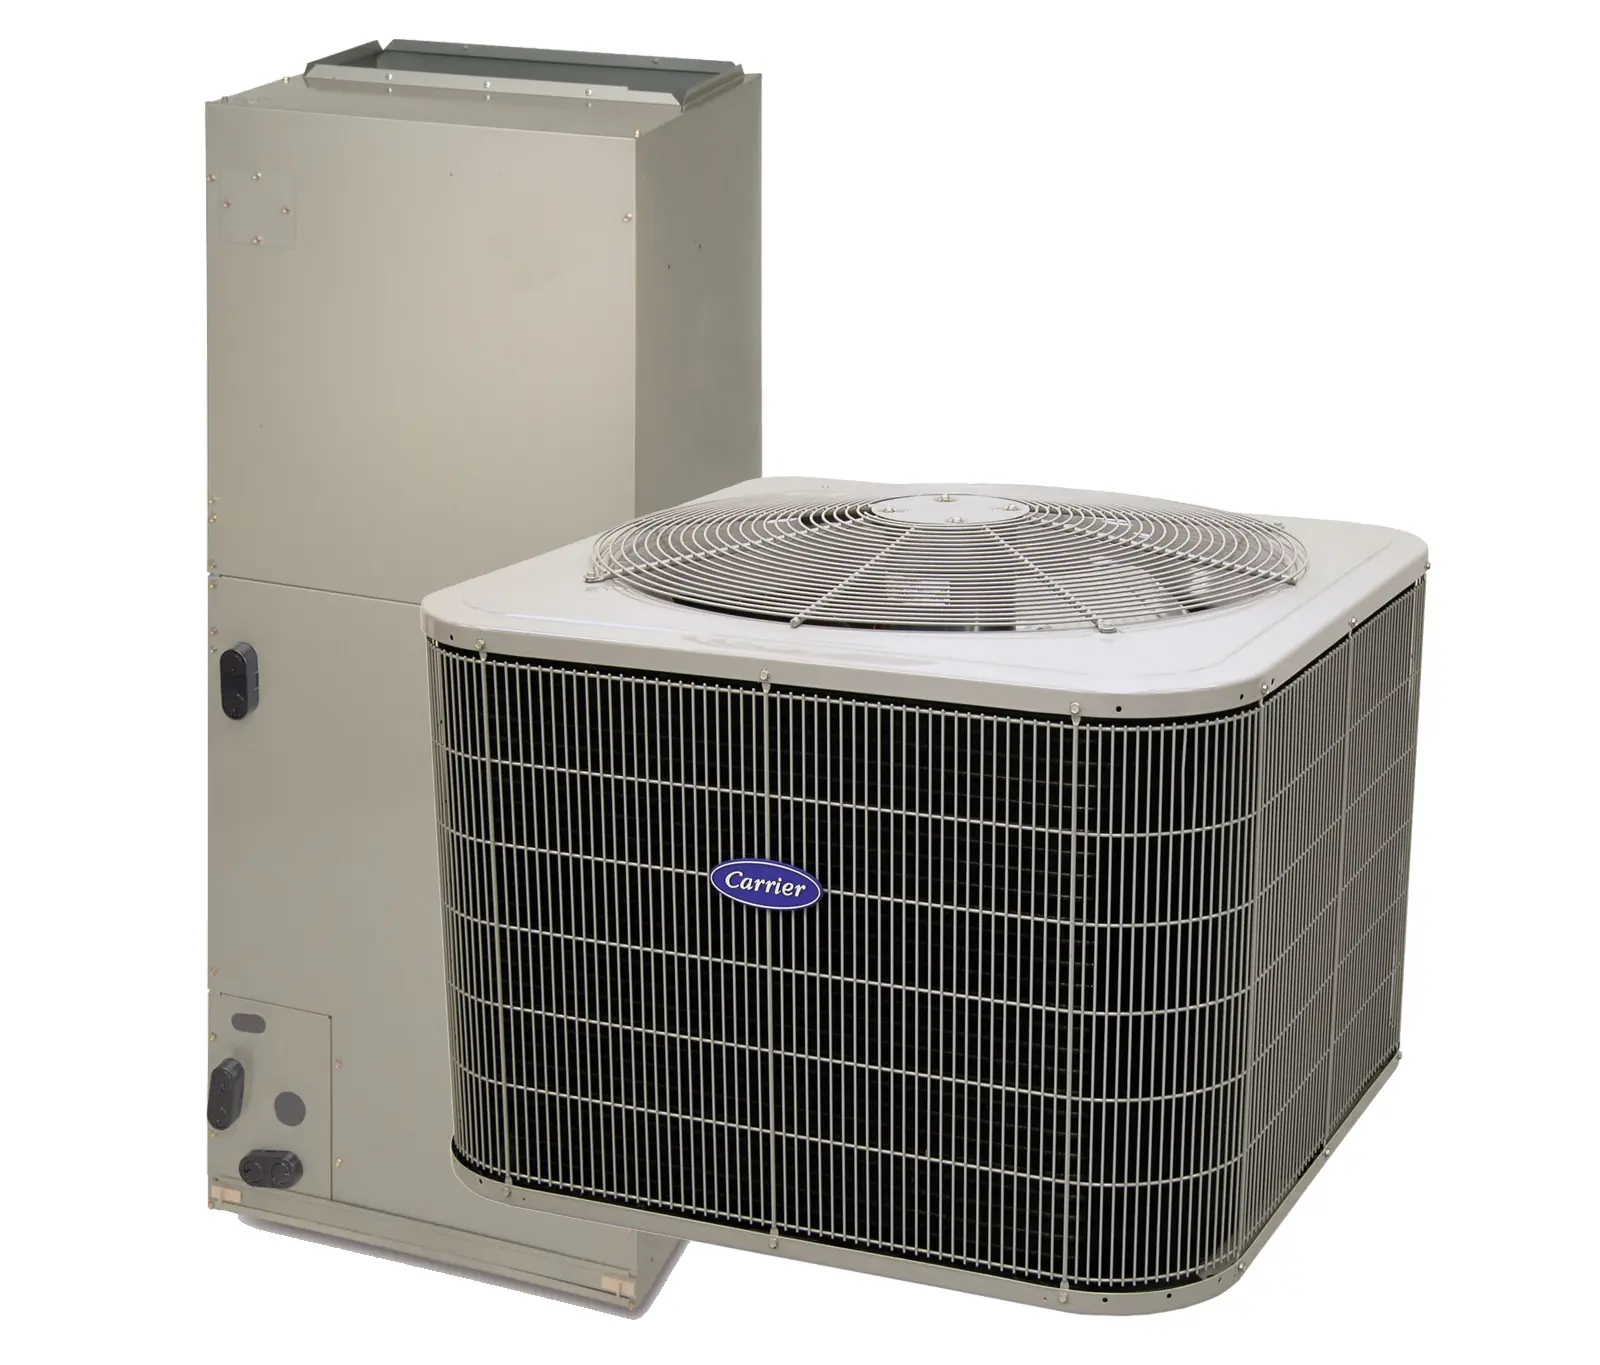 Carrier comfort AC unit pricing